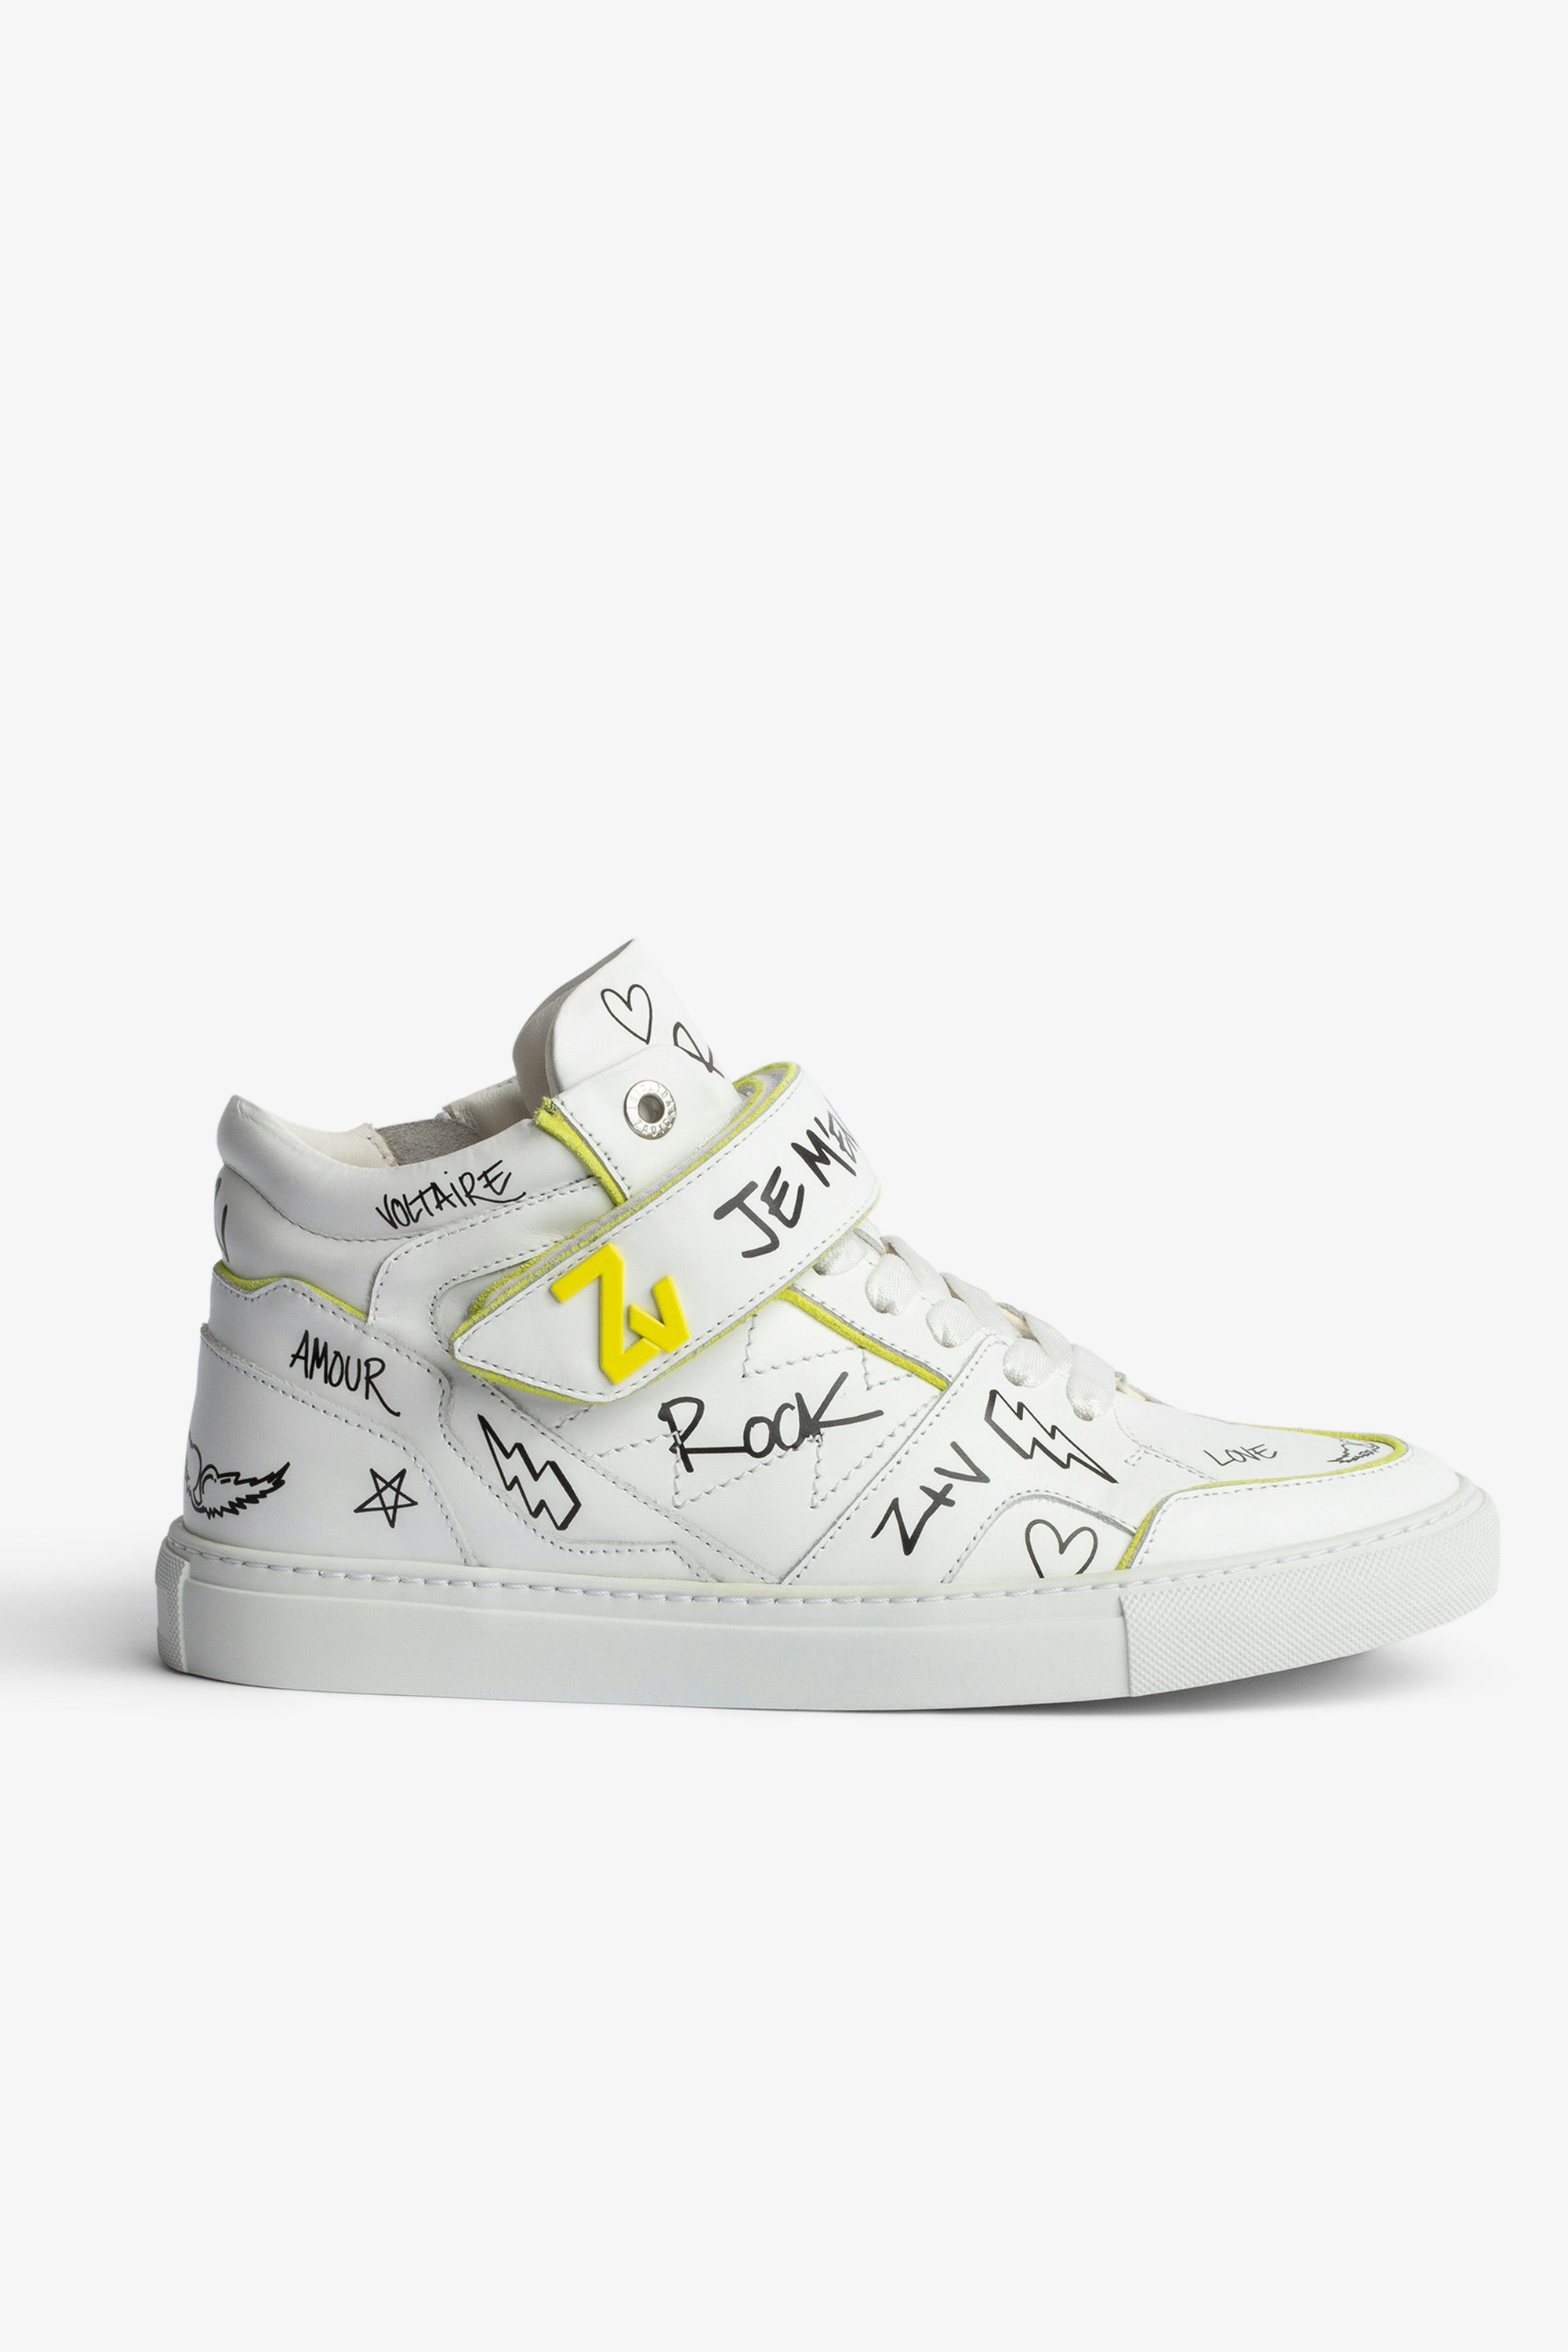 ZV1747 Mid Flash Fluorescent Suede Charms Sneakers - Suede mid-top sneakers with lettering and Velcro fastening